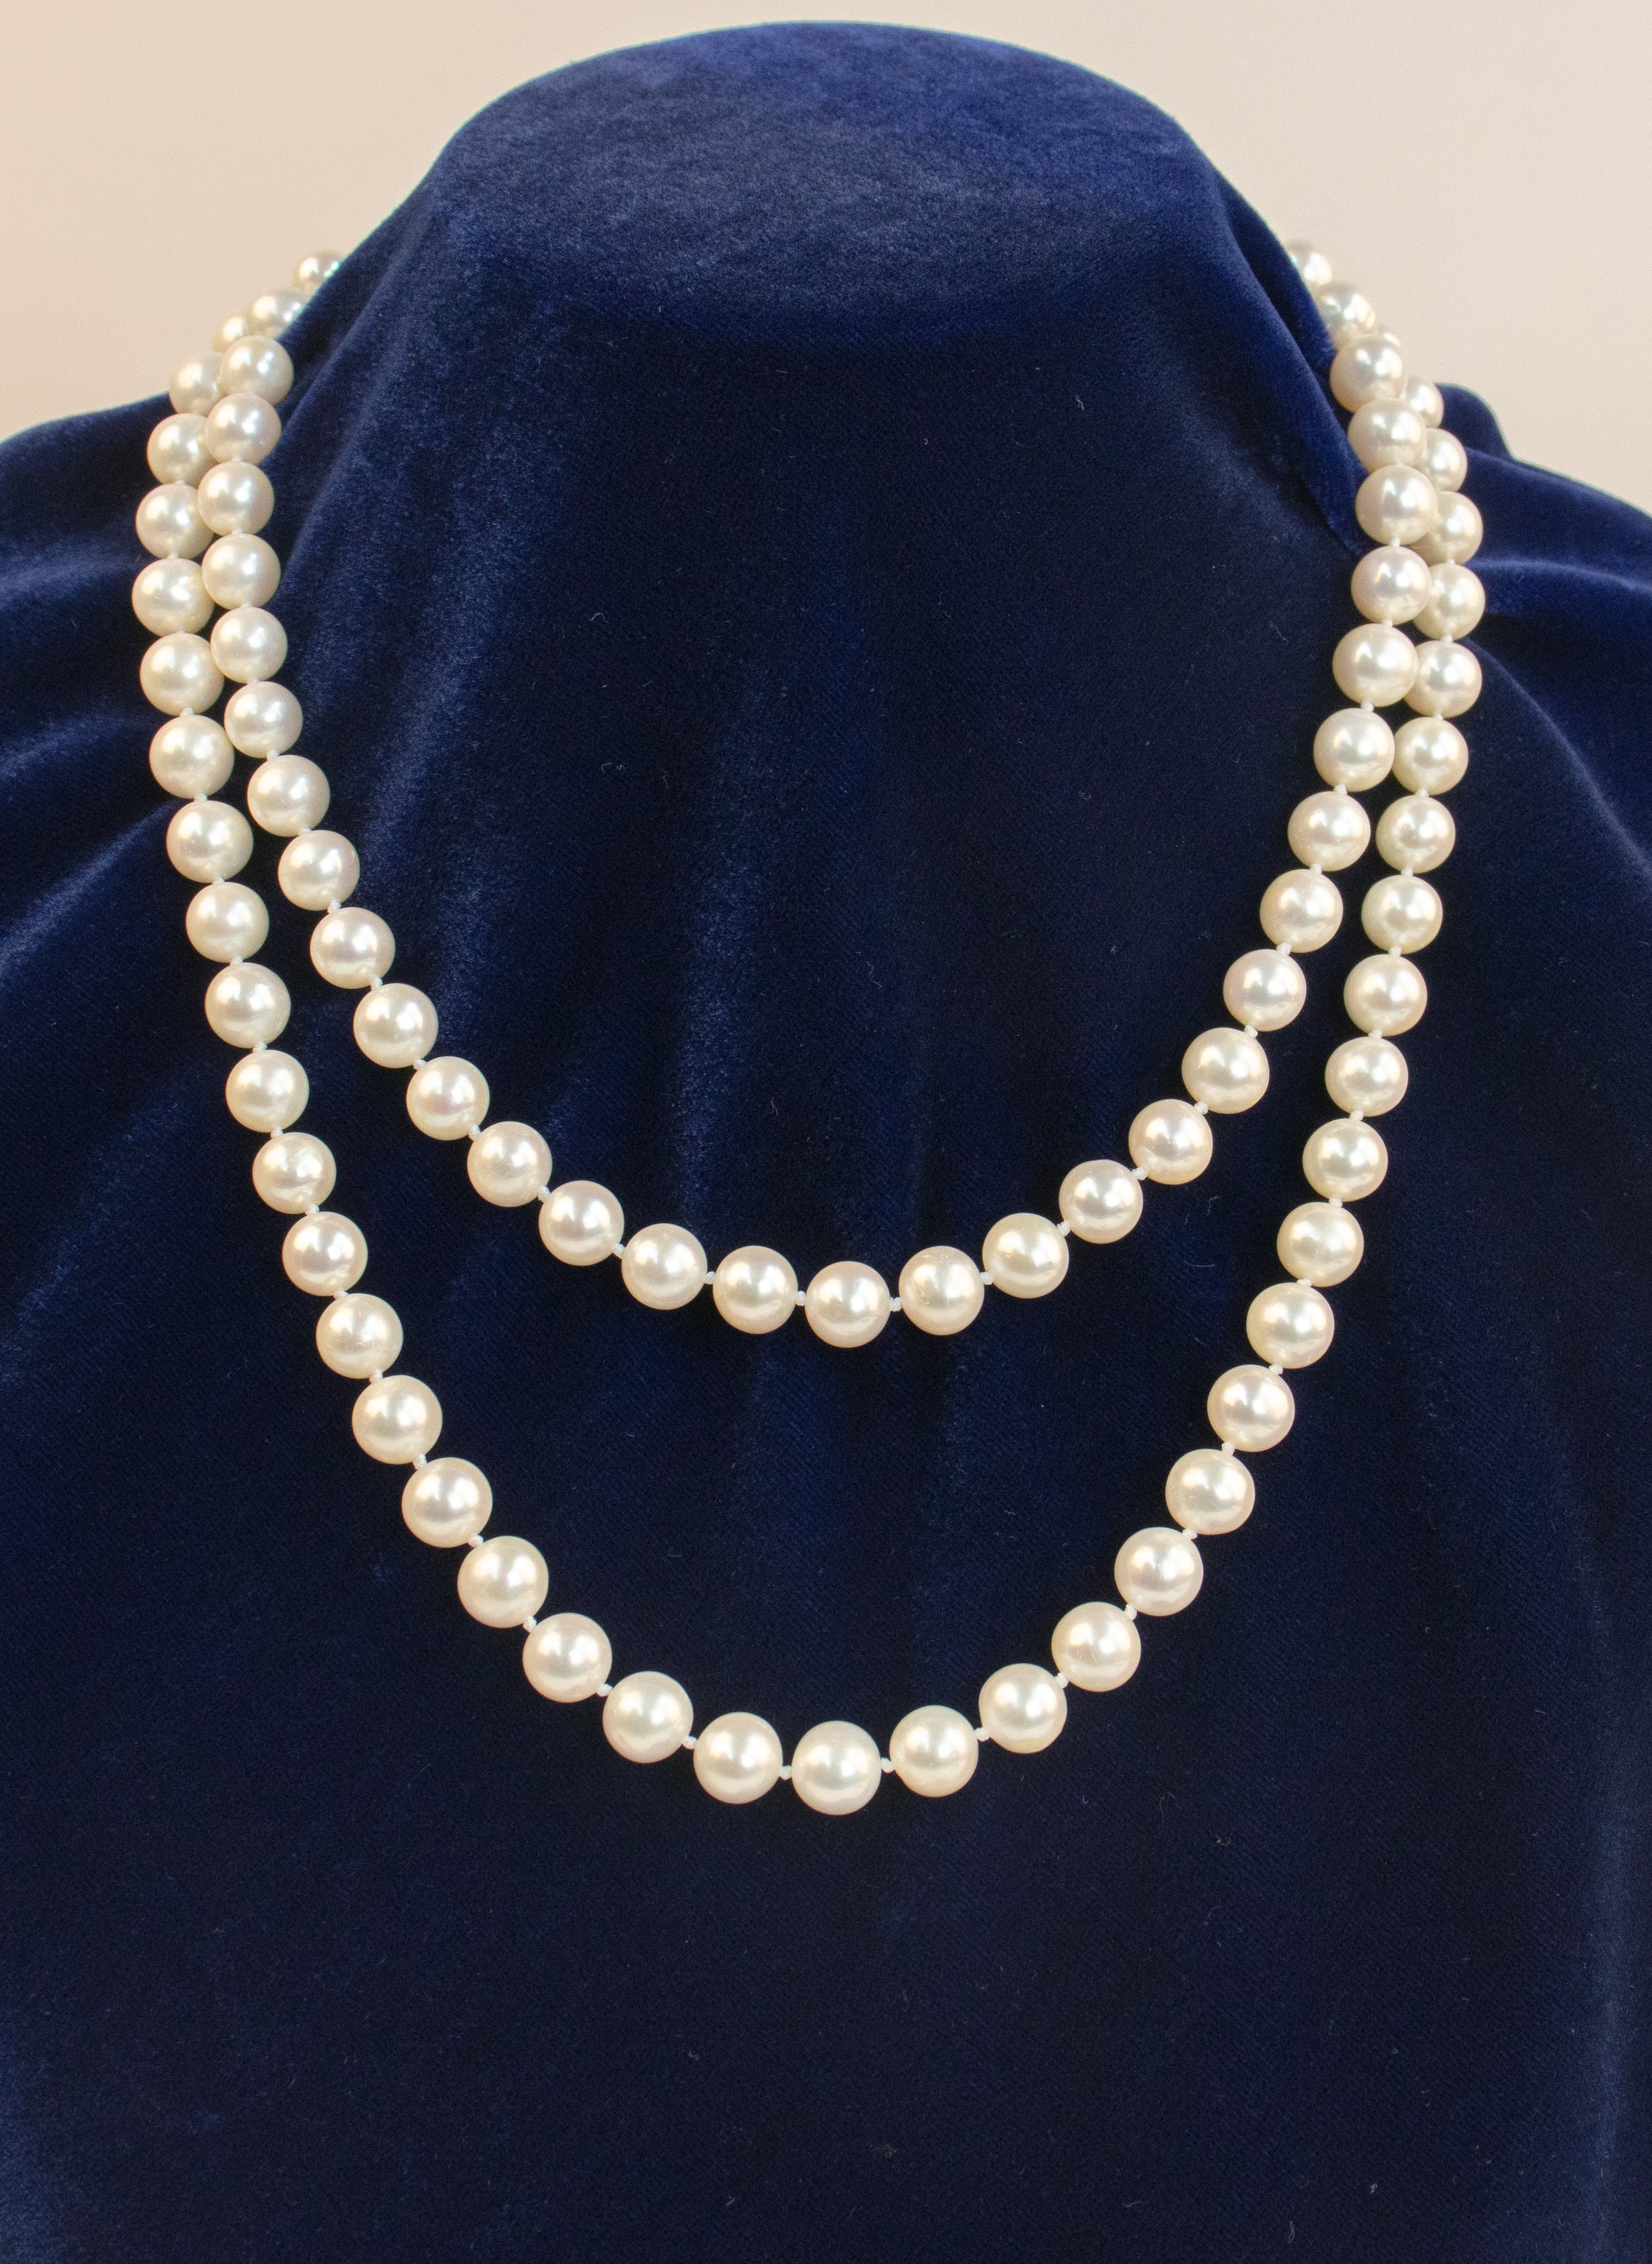 Long Necklace With Round Genuine Freshwater Pearls, Classic